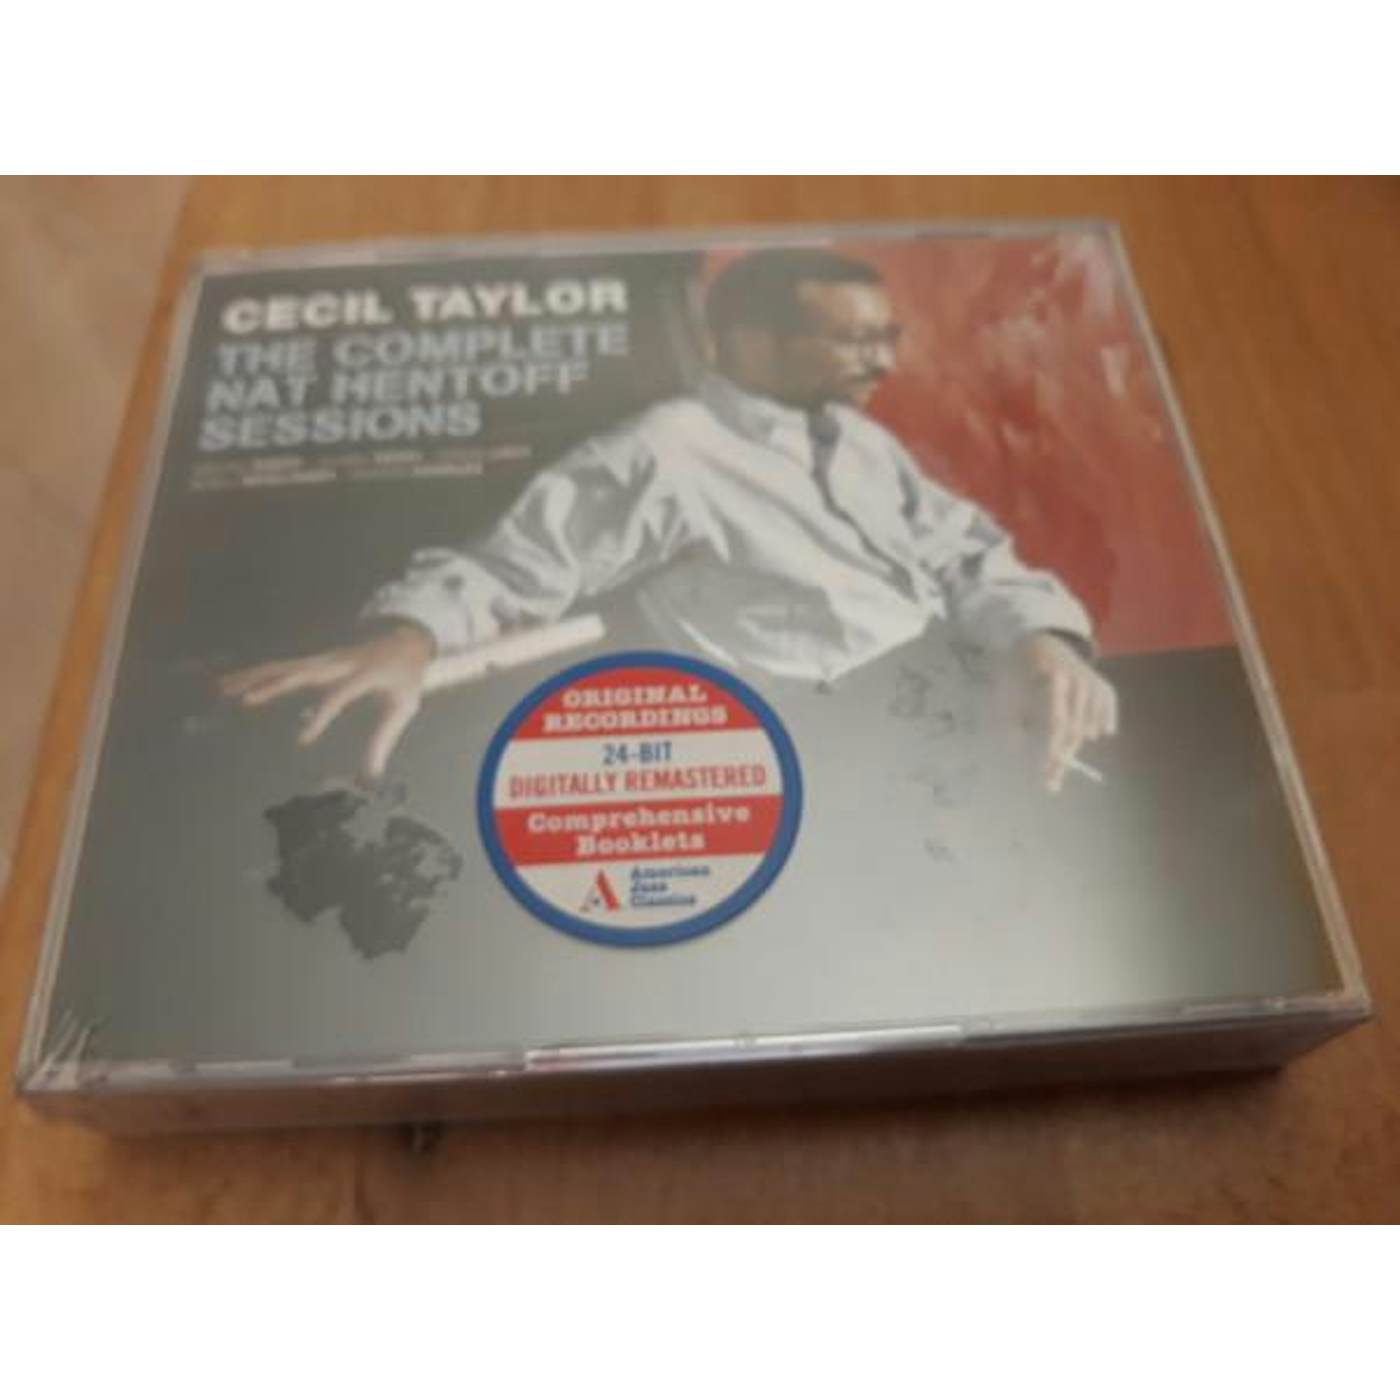 Cecil Taylor COMPLETE NAT HENTOFF SESSIONS (4CD) CD